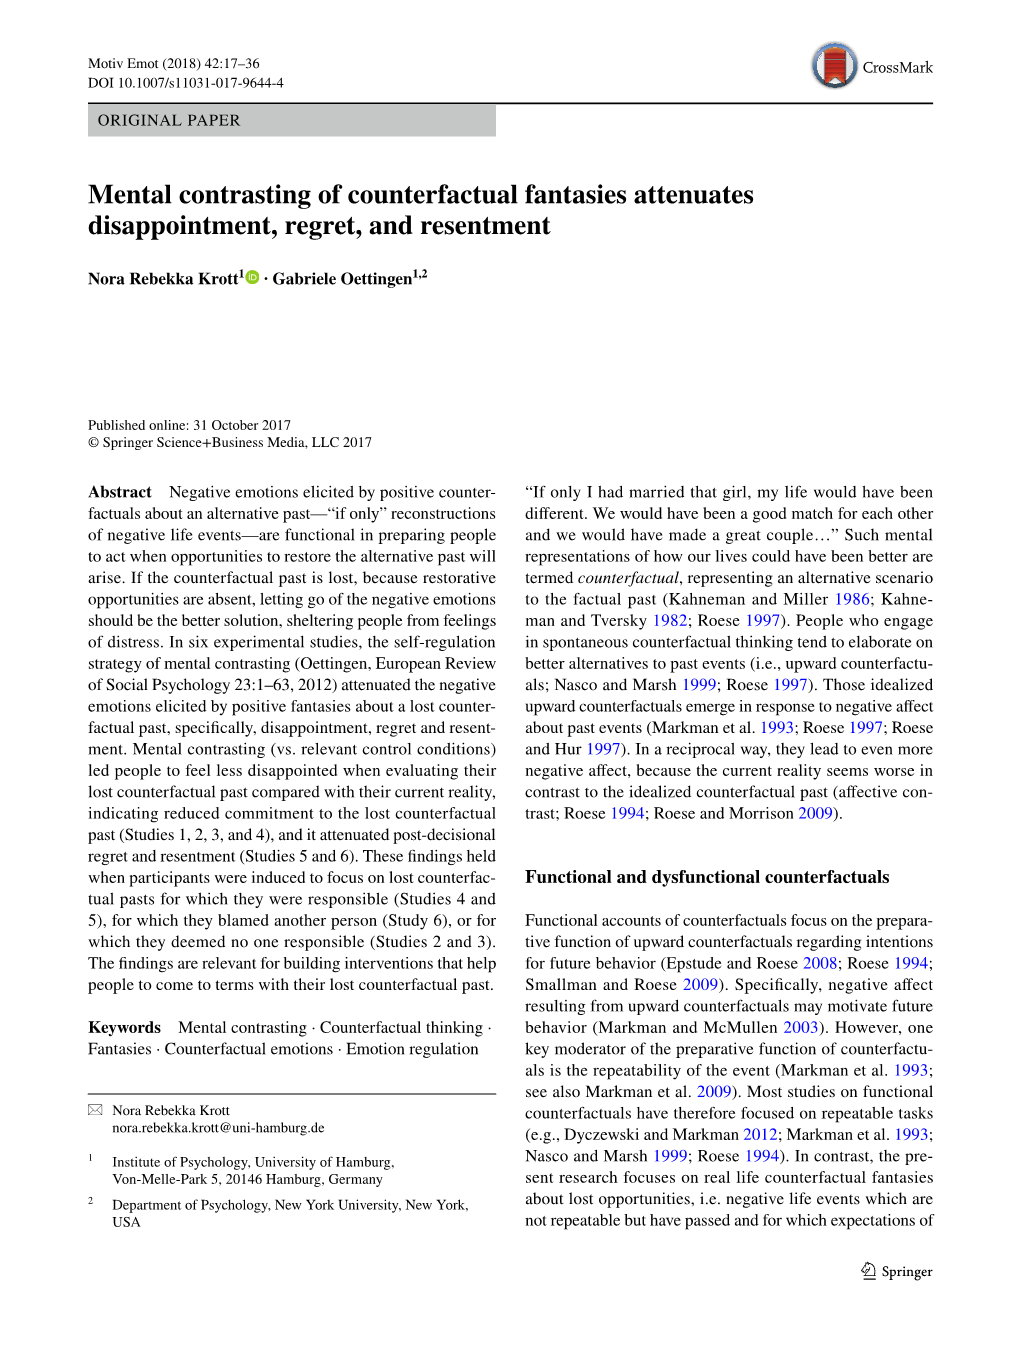 Mental Contrasting of Counterfactual Fantasies Attenuates Disappointment, Regret, and Resentment